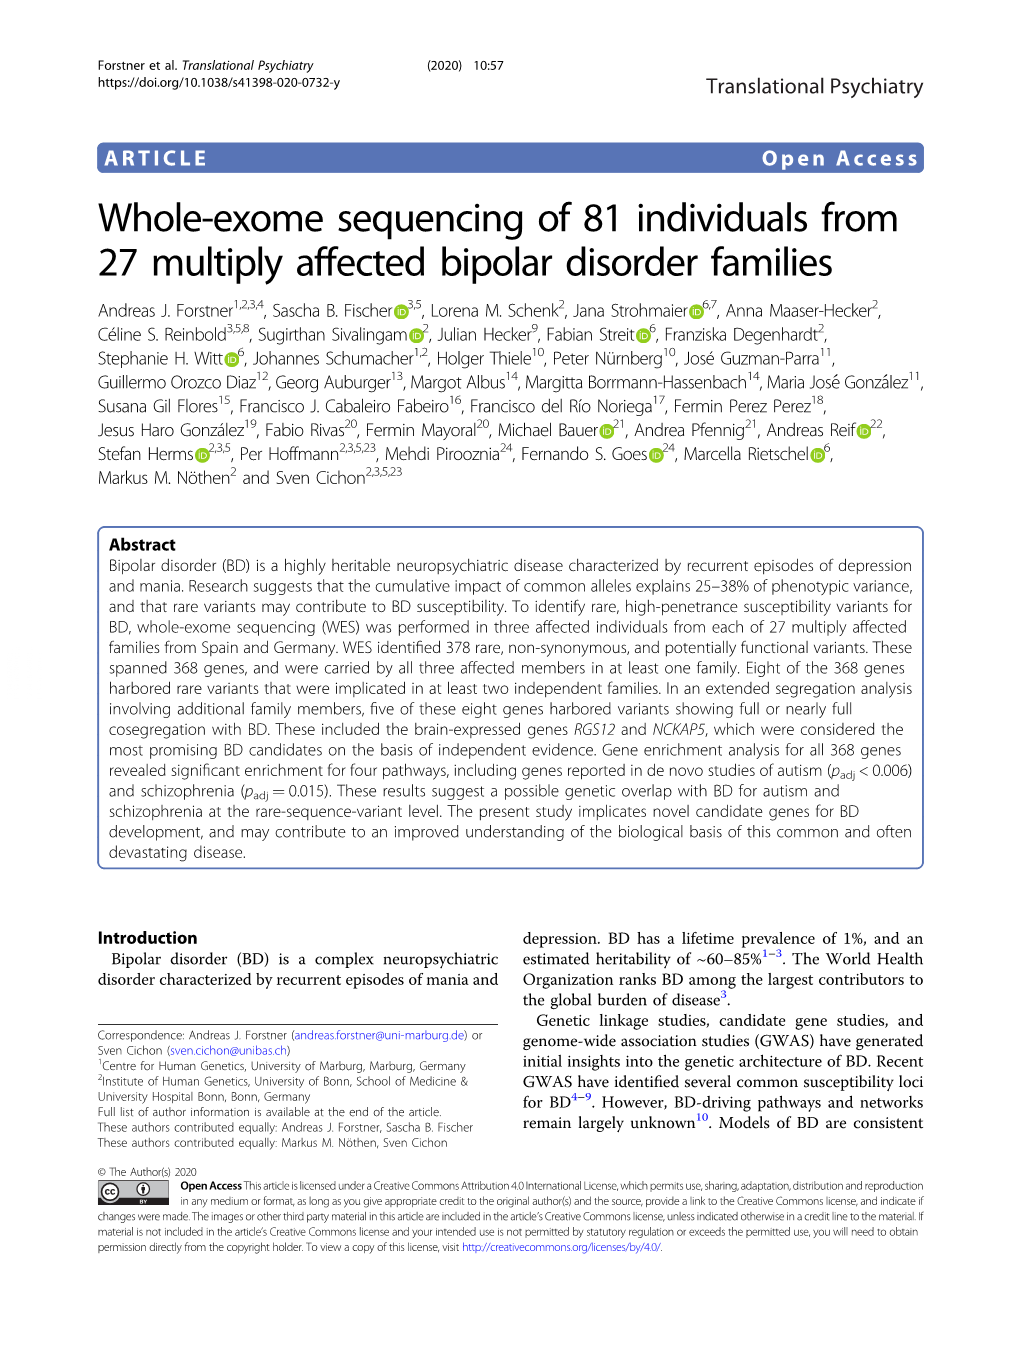 Whole-Exome Sequencing of 81 Individuals from 27 Multiply Affected Bipolar Disorder Families Andreas J